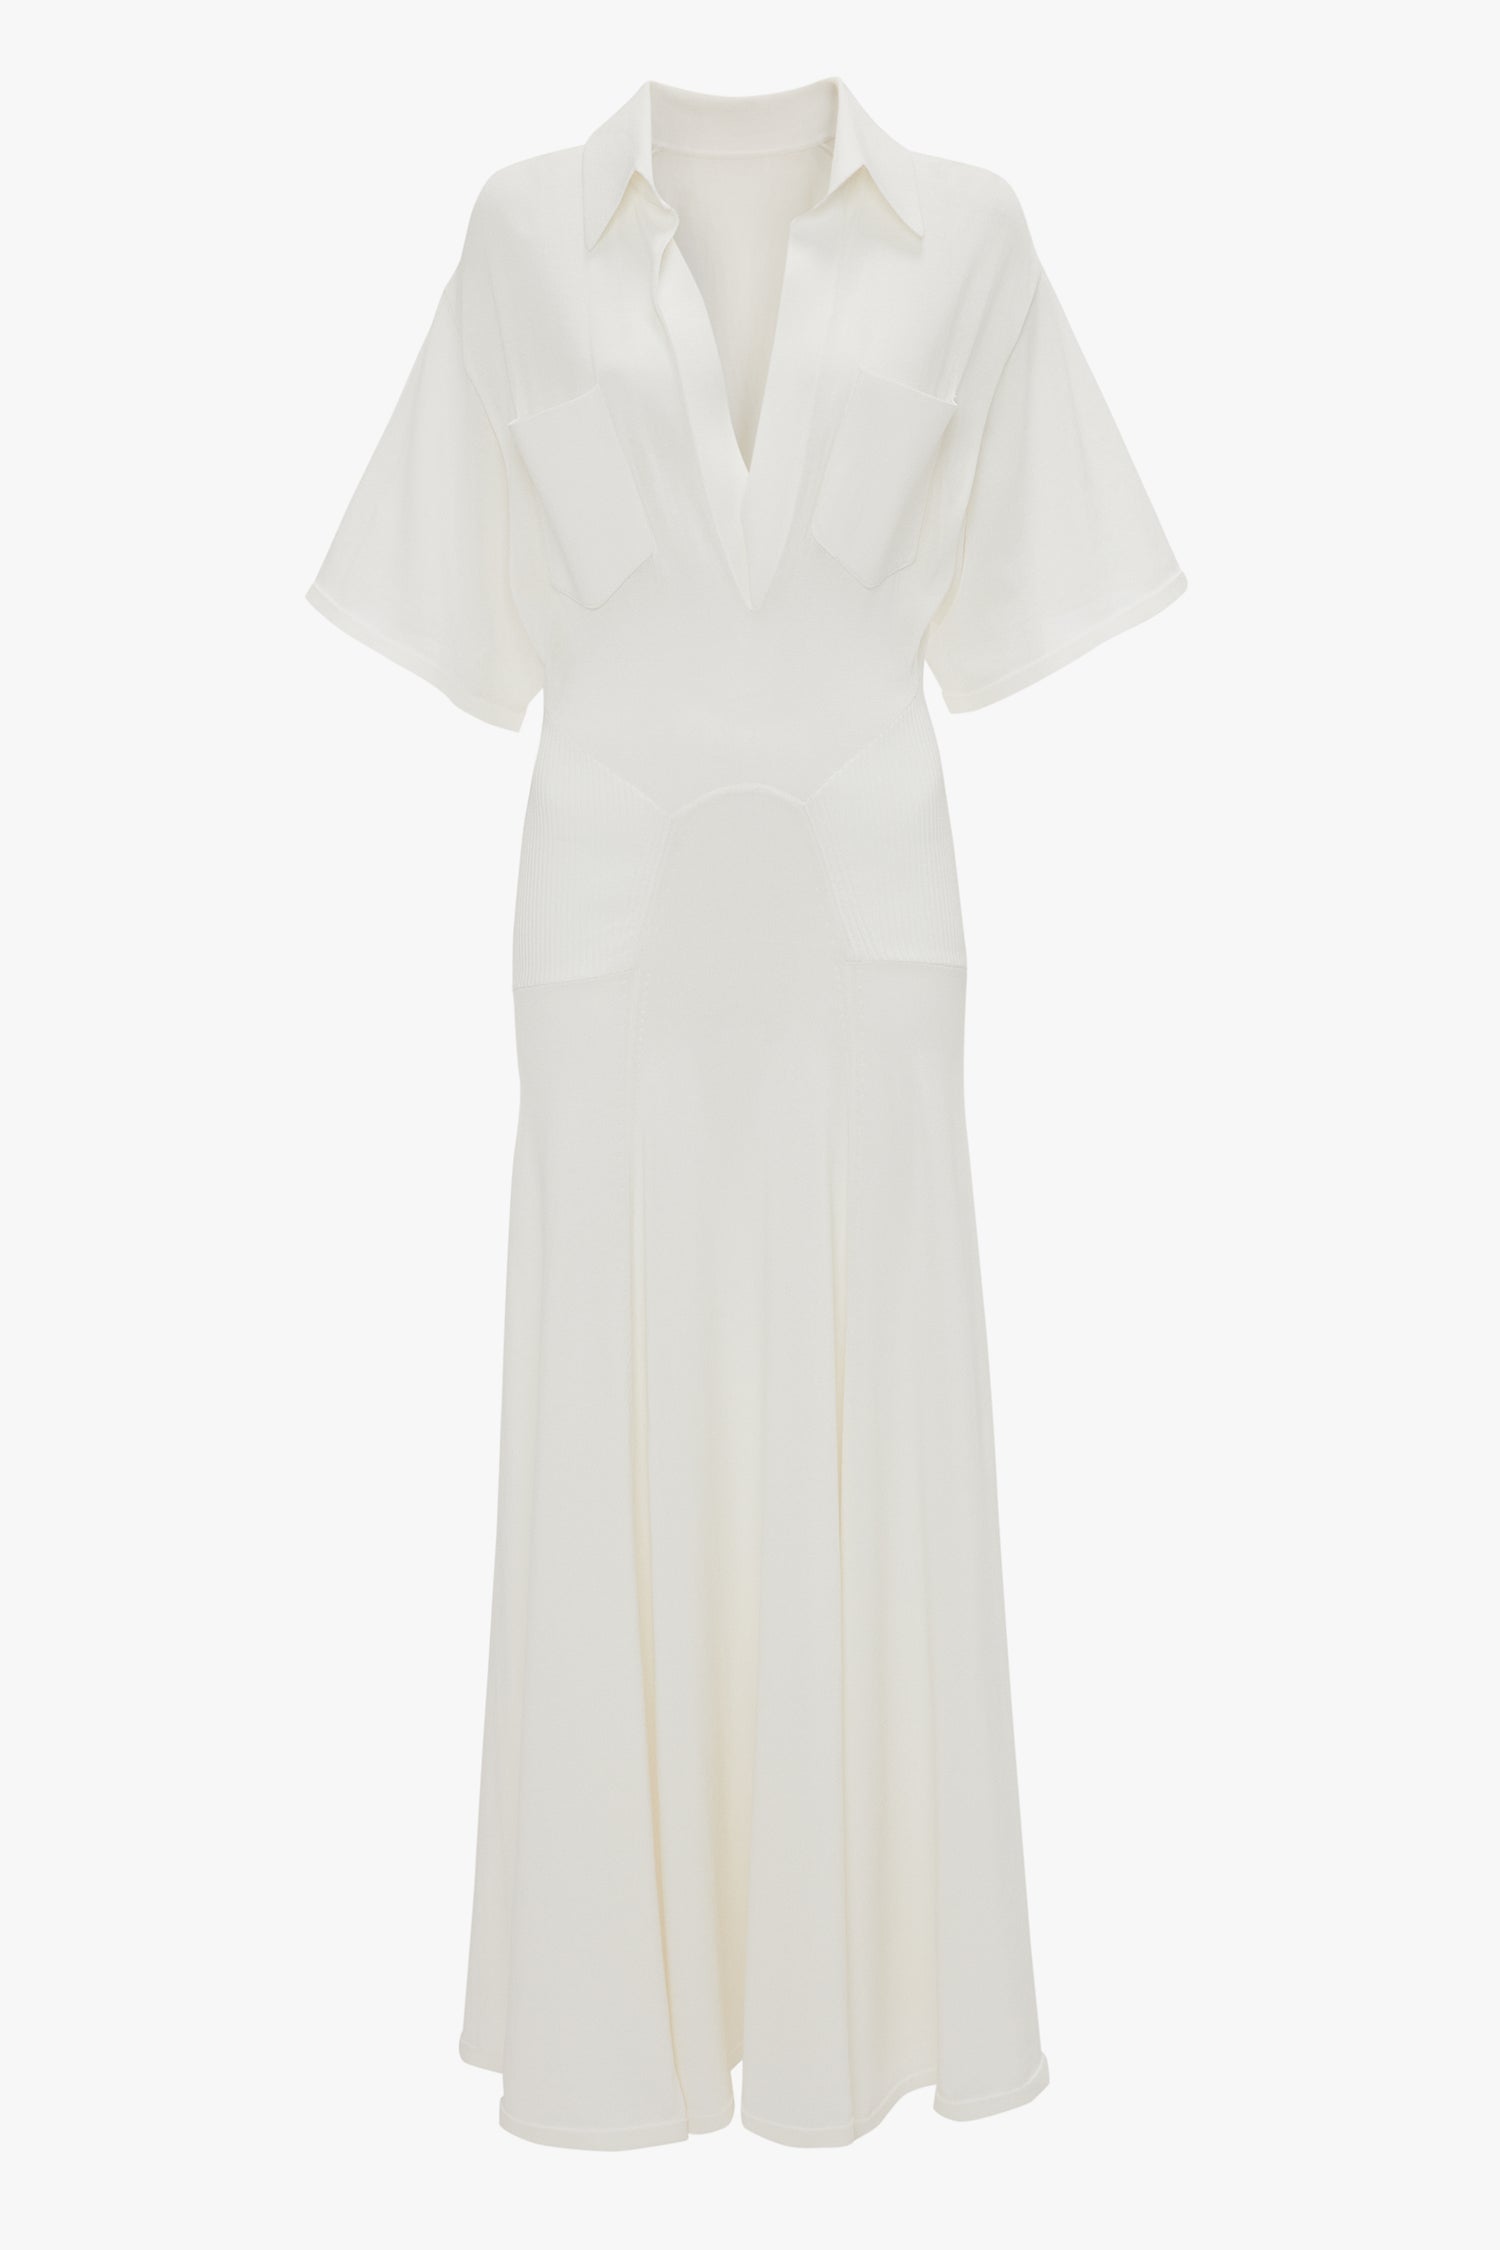 A white, short-sleeved, collared dress with a flared skirt and two front pockets exuding relaxed glamour. The "Panelled Knit Dress In White" by Victoria Beckham is made from fine-gauge knit for that perfect blend of comfort and style.